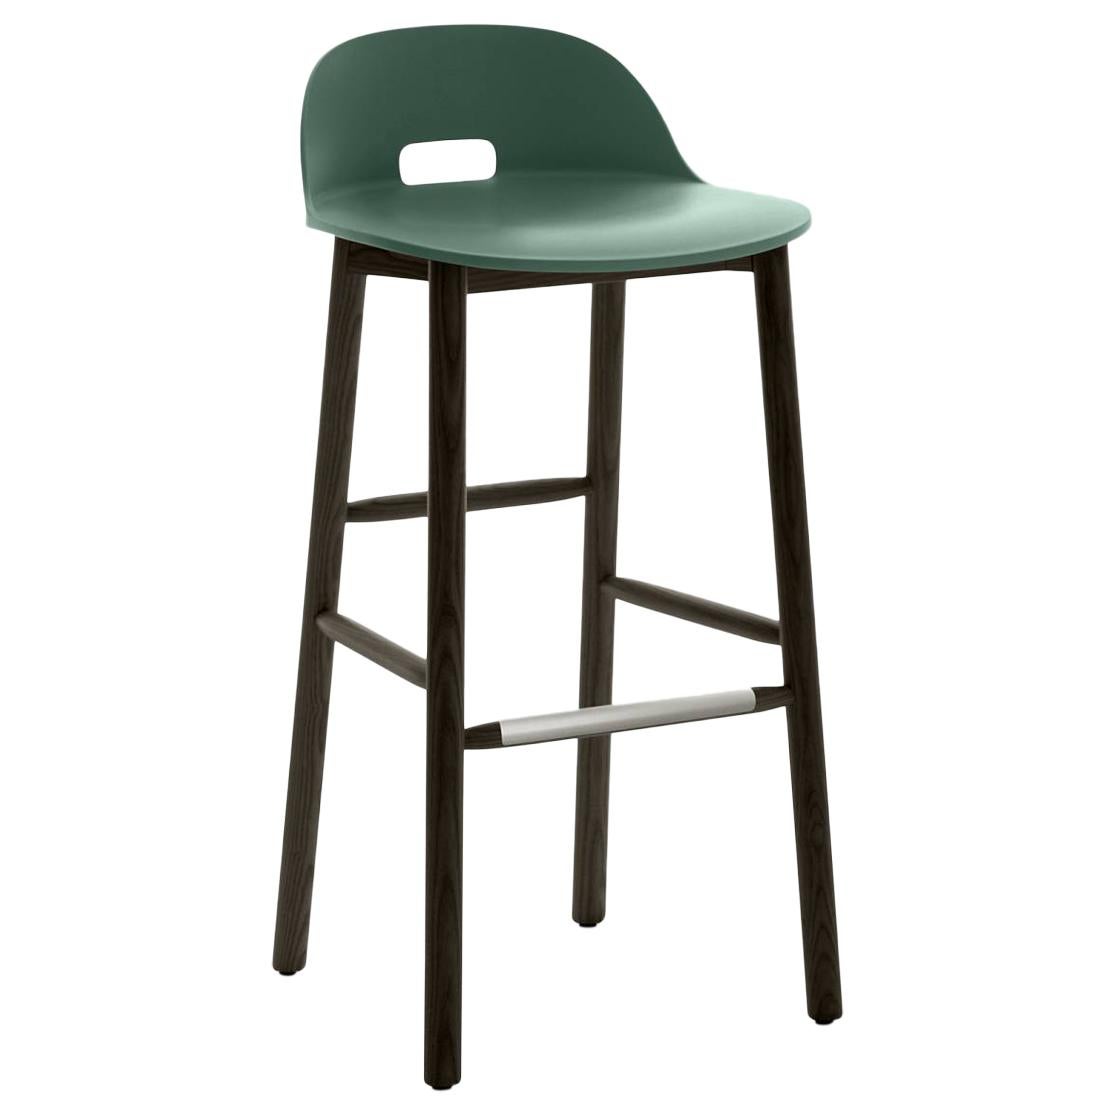 Emeco Alfi Barstool in Green and Dark Ash with Low Back by Jasper Morrison